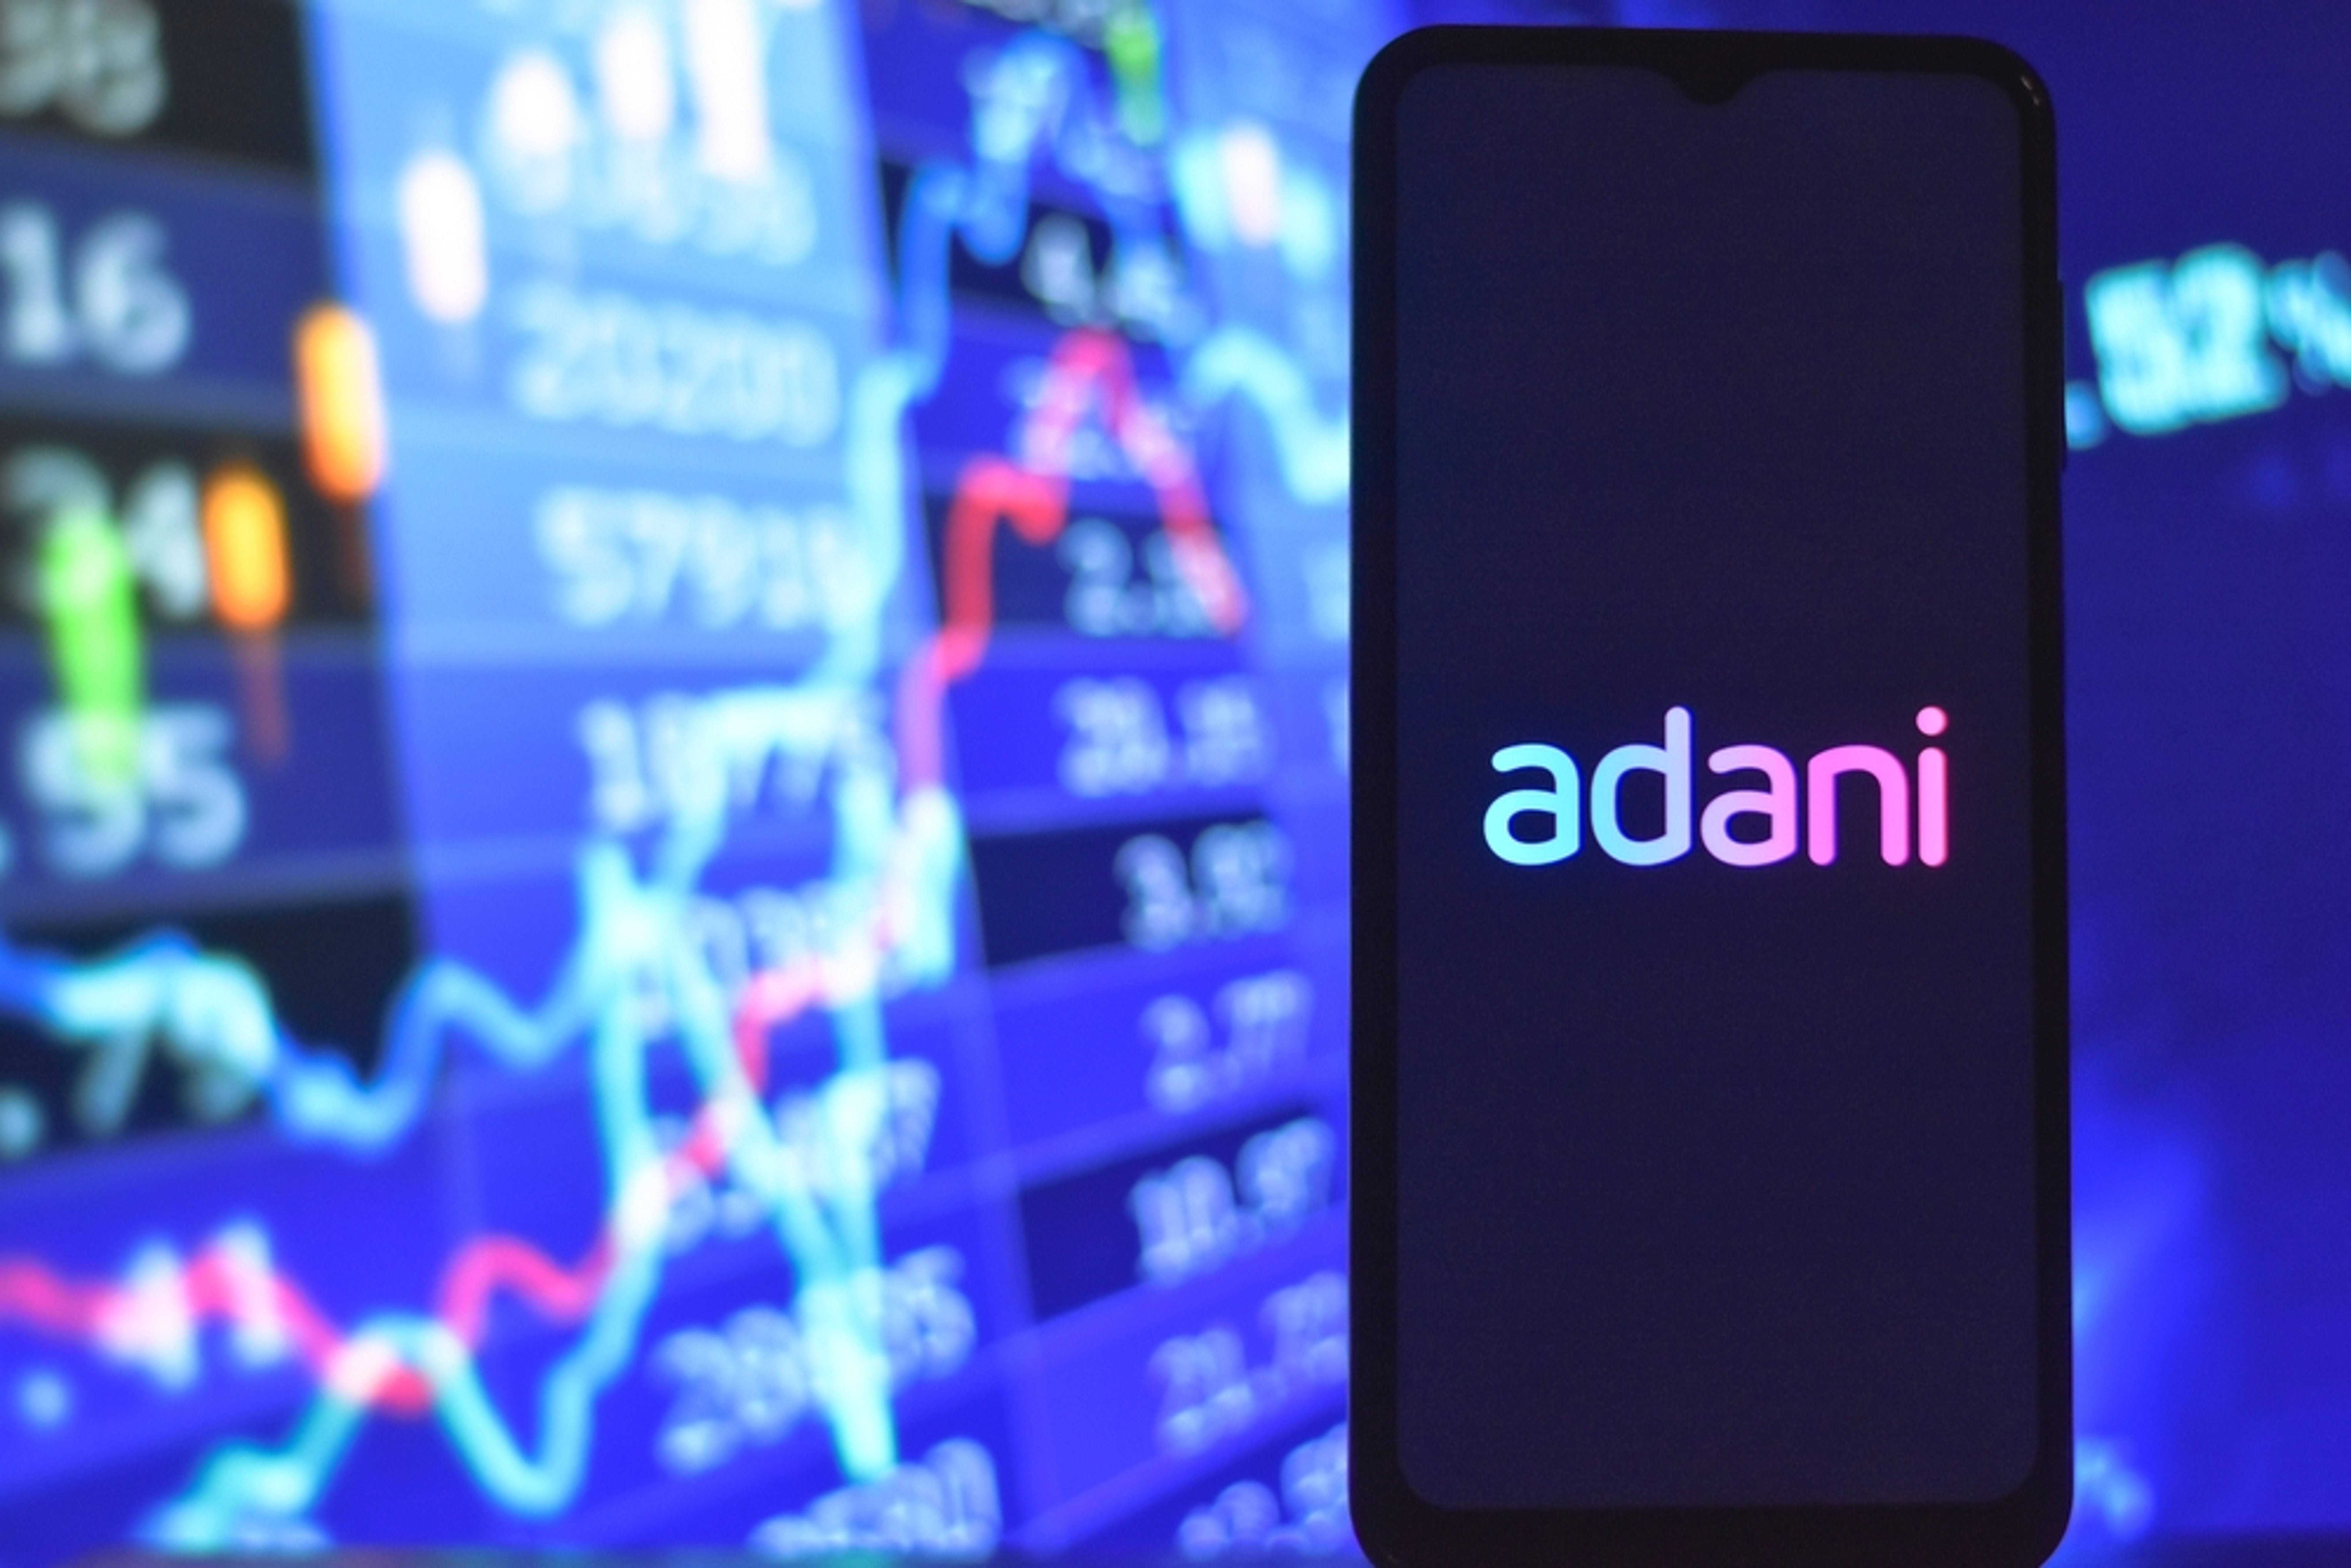 Adani Firm Gets Green Light For Investment From French Energy Giant, Shares Still Slide